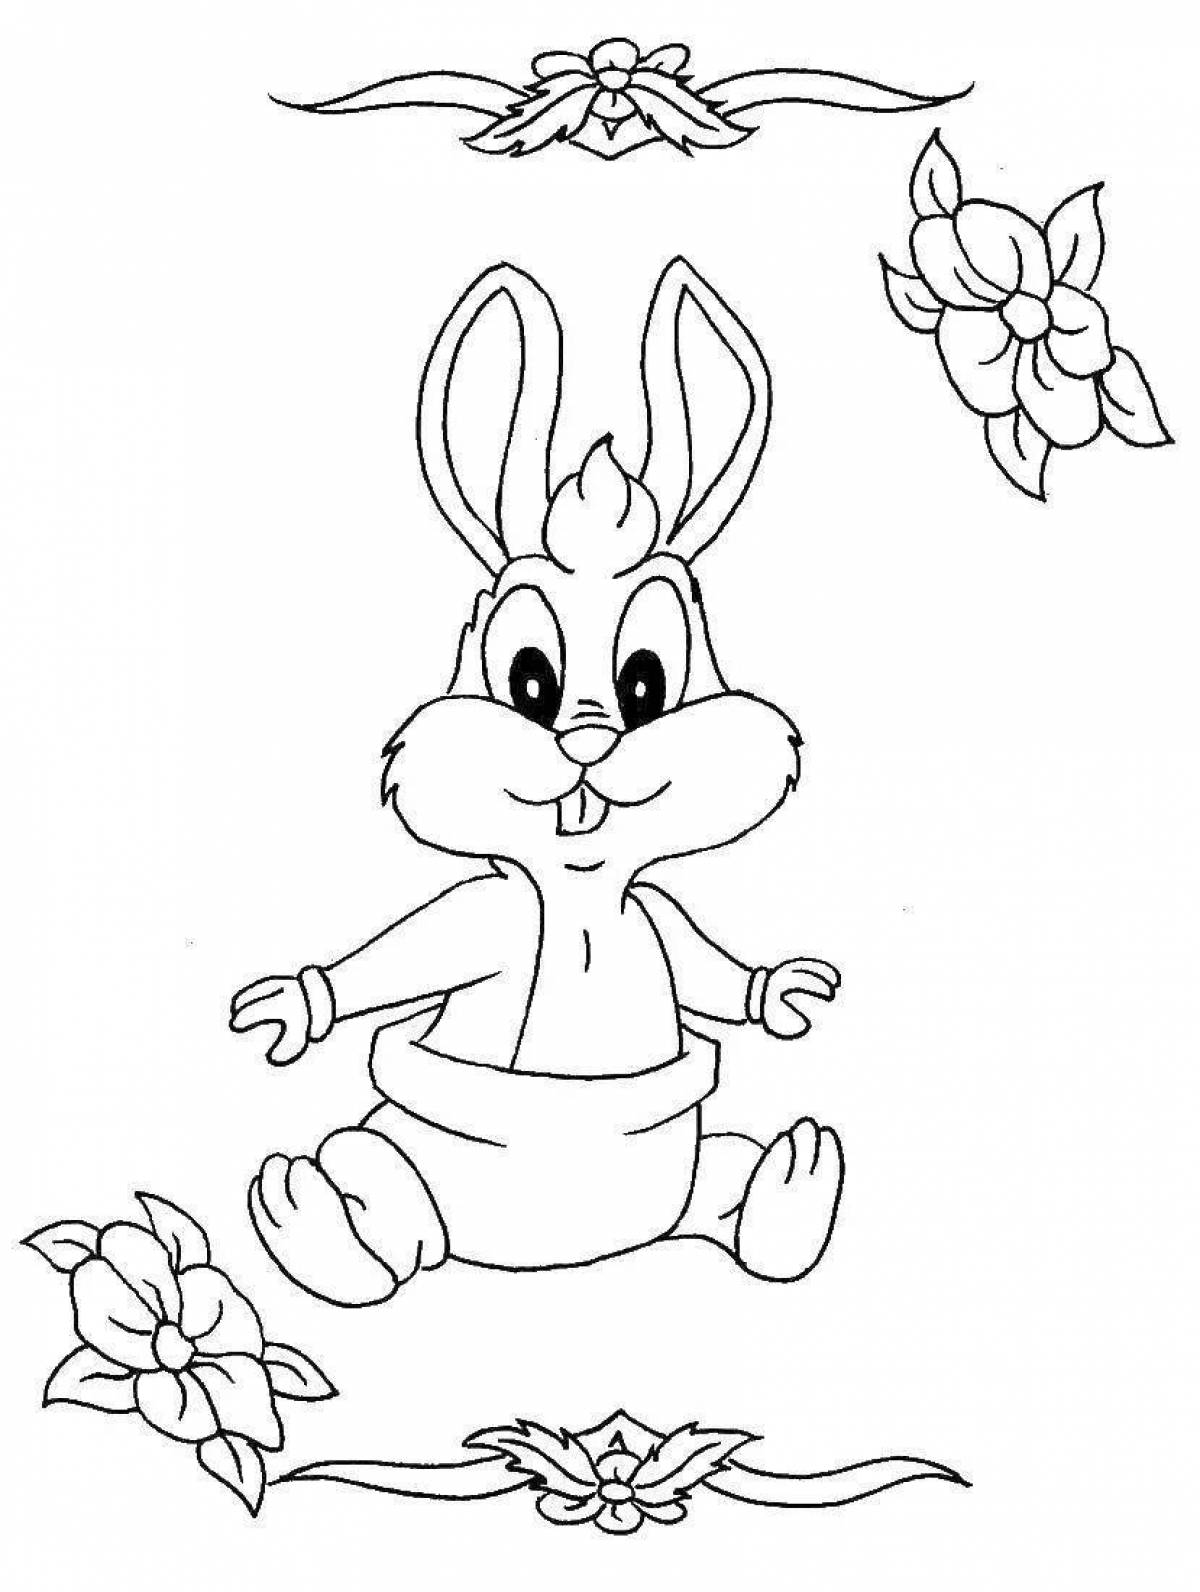 Colorful hare coloring book